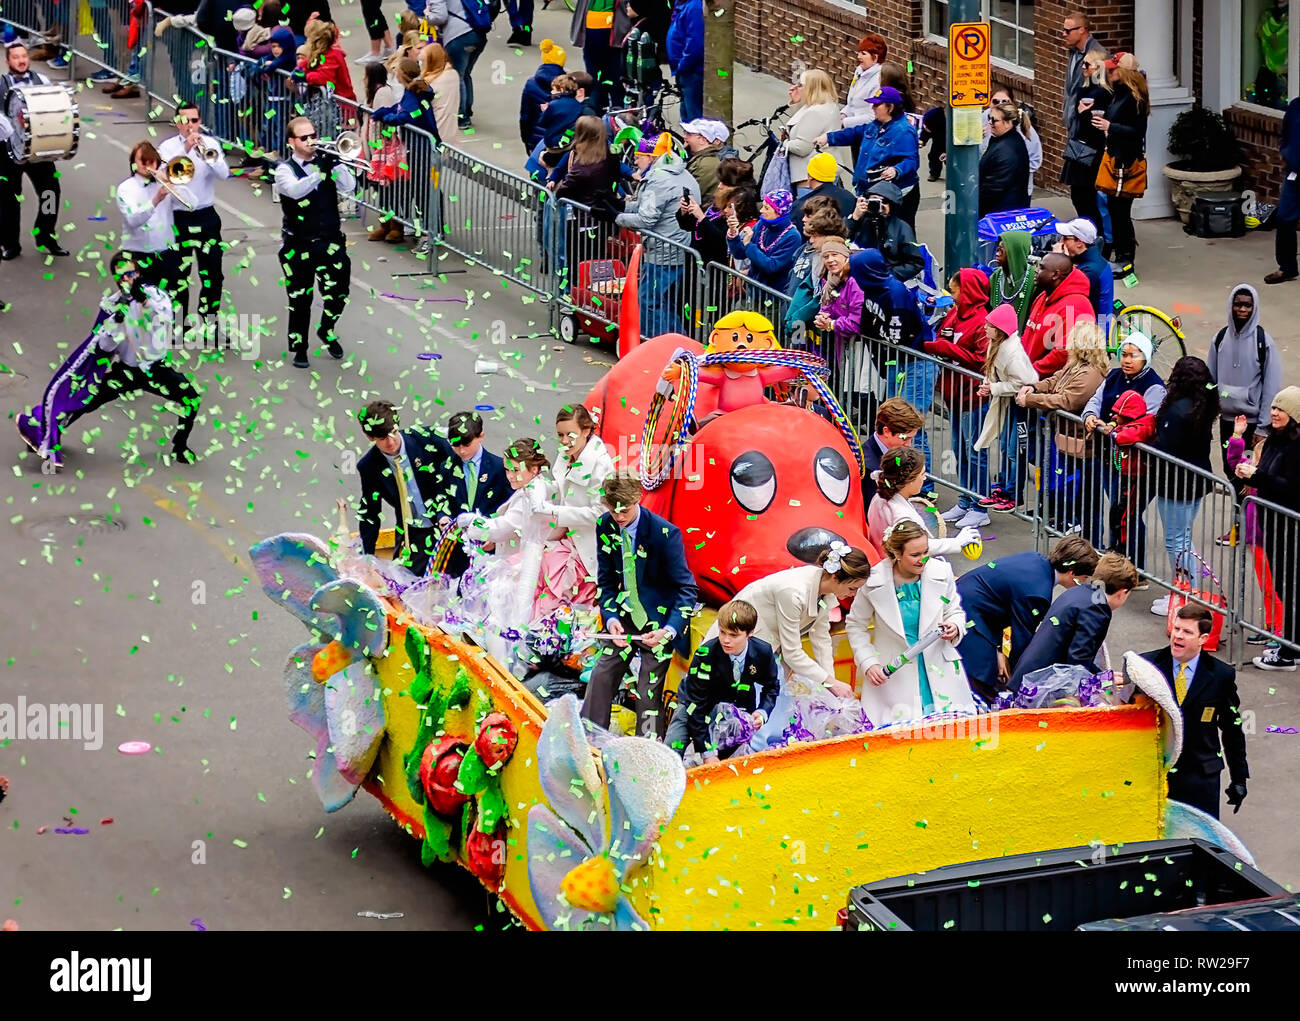 Mobile, Alabama, USA. 4th March, 2019. A Mardi Gras float featuring Clifford the Big Red Dog travels down Royal Street during the Floral Parade, March 4, 2019, in Mobile, Alabama. The theme of this year’s floral parade was “Throw Me a Book,” with 16 floats featuring classic characters from children’s books. Mobile’s first official Mardi Gras celebration was recorded in 1703. Mardi Gras originated as a French tradition of feasting and revelry before the austere Catholic Lent. Credit: Carmen K. Sisson/Cloudybright/Alamy Live News Stock Photo